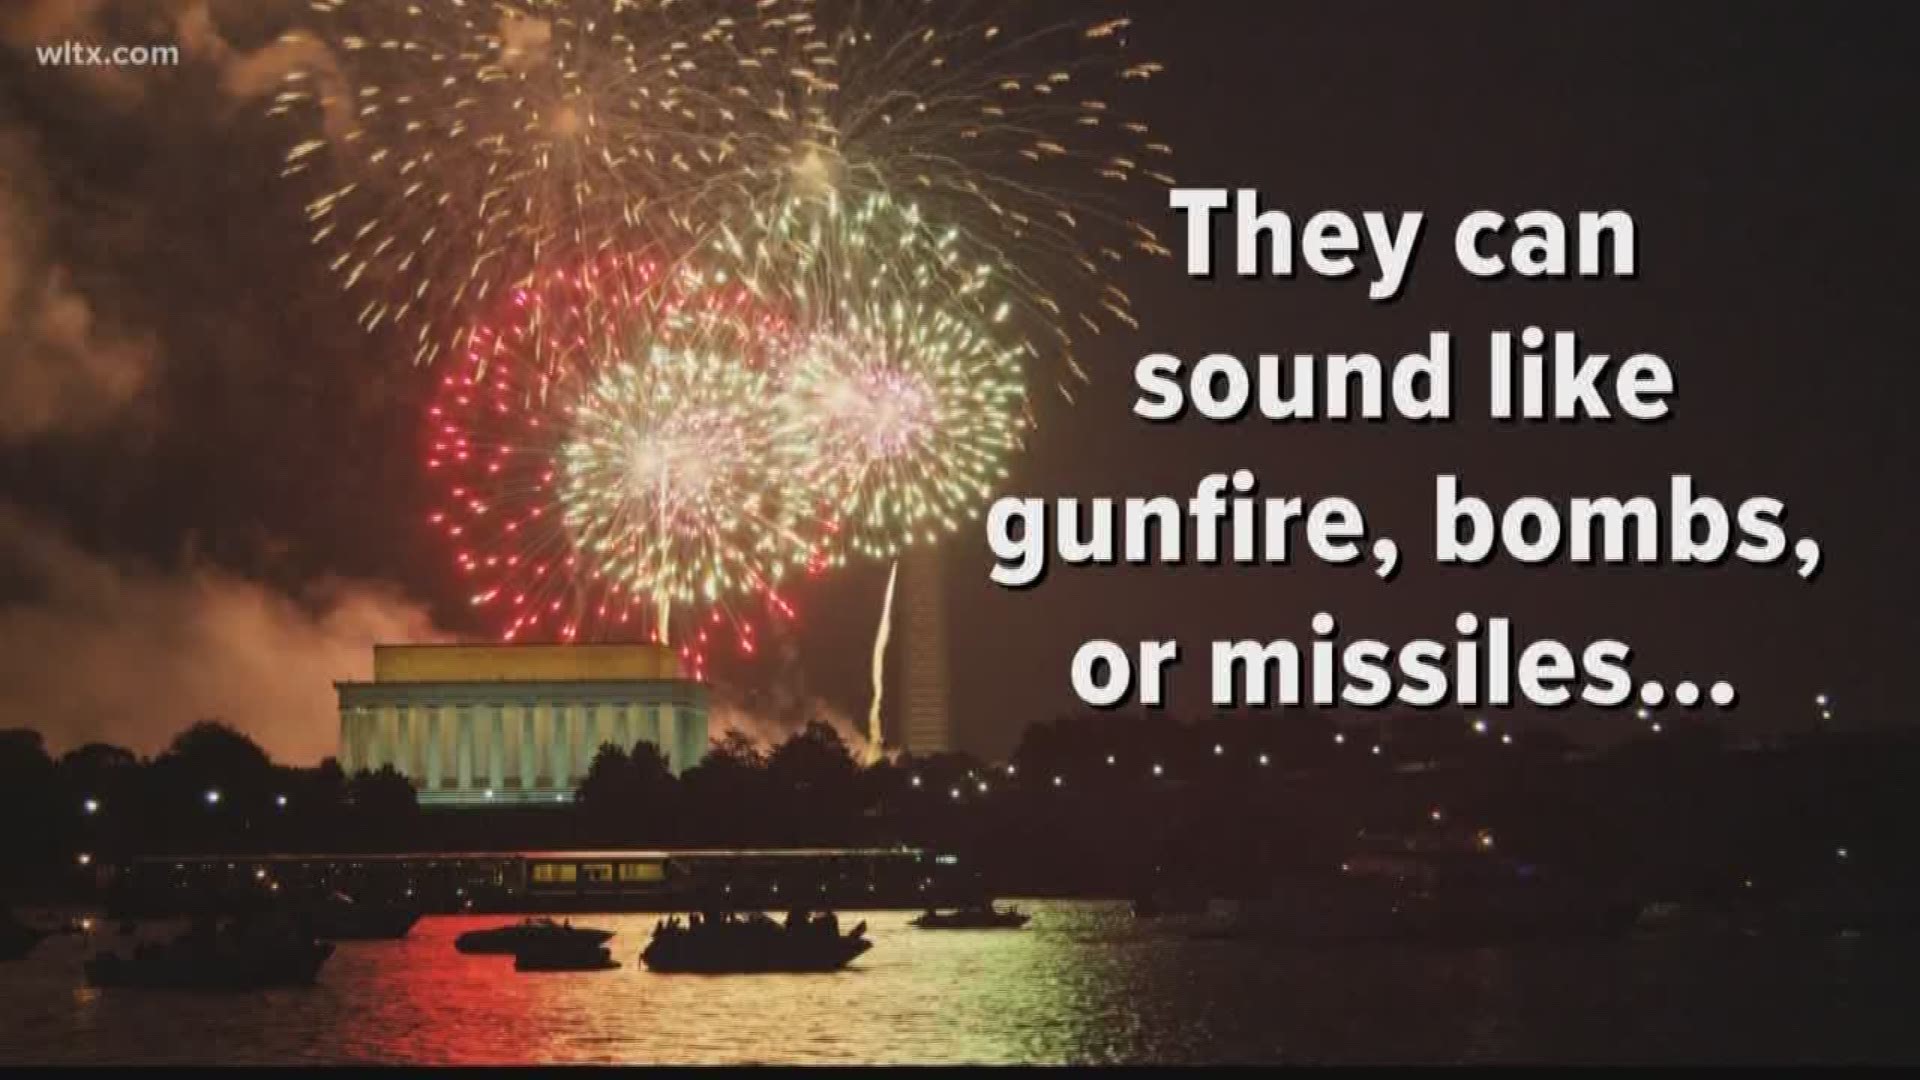 The fireworks for the Fourth of July can be fun, but they can be a bad trigger for people suffering from PTSD.